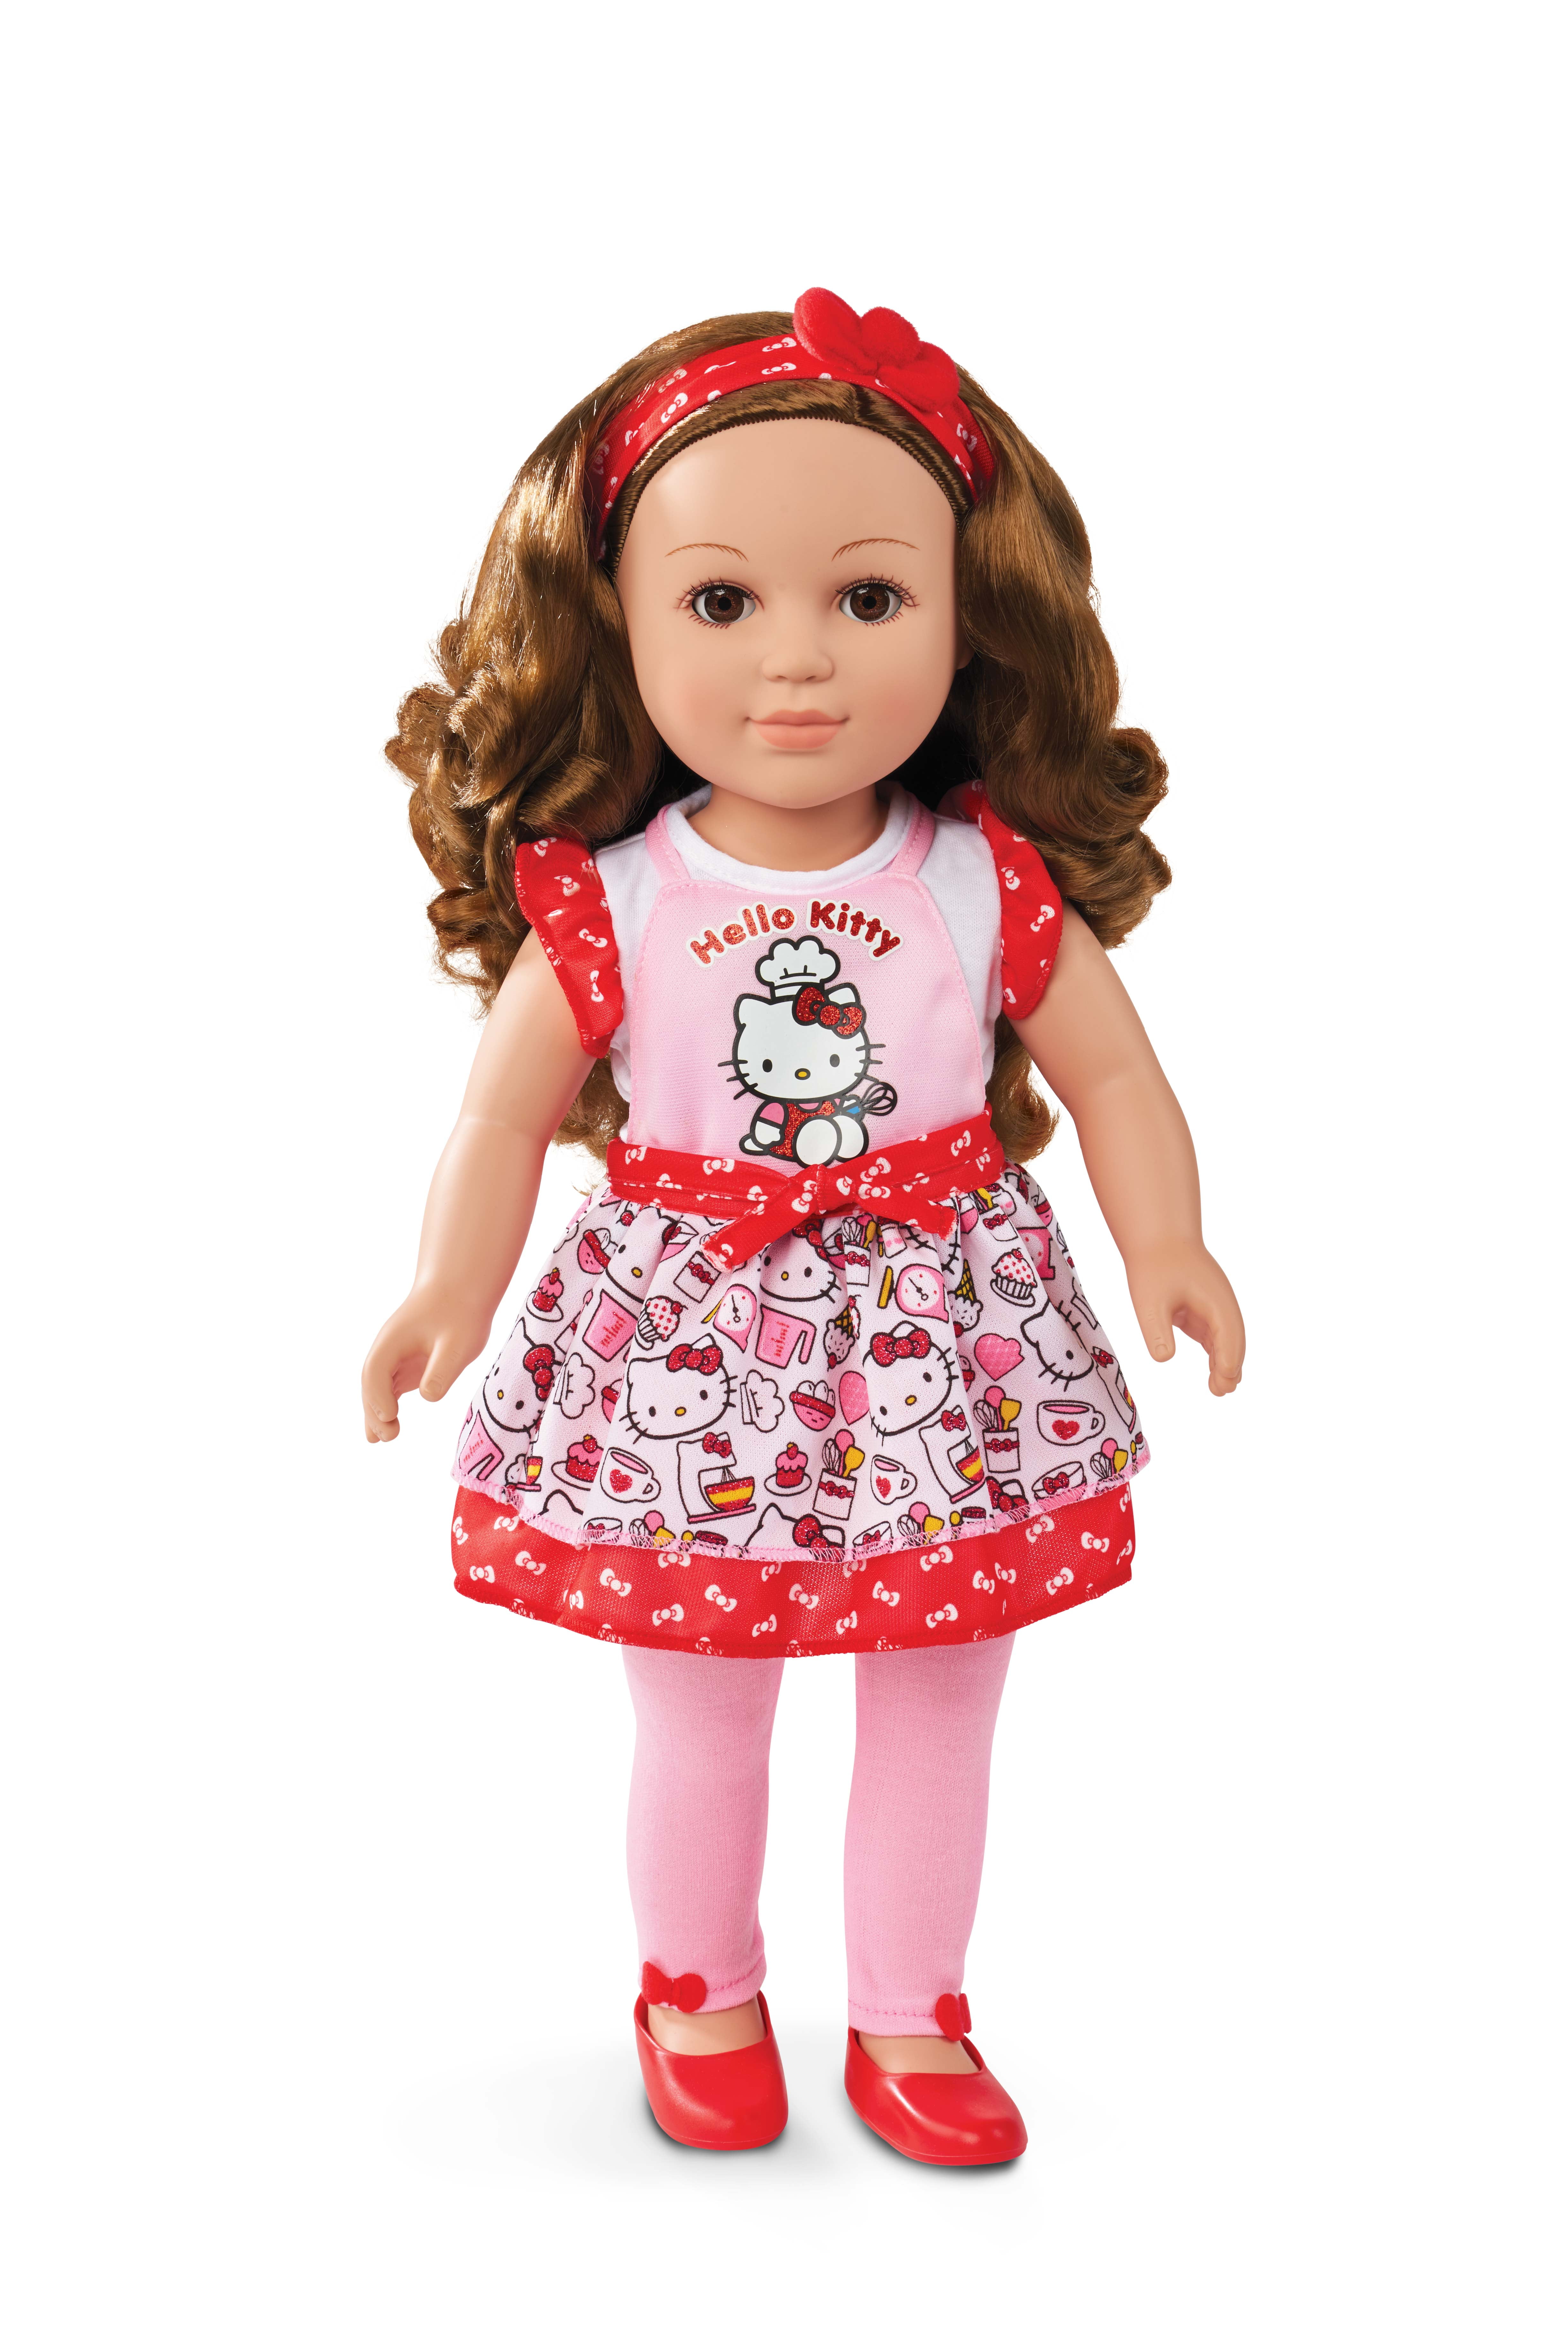 Blonde Hair My Life As 18" Poseable Hello Kitty Doll 